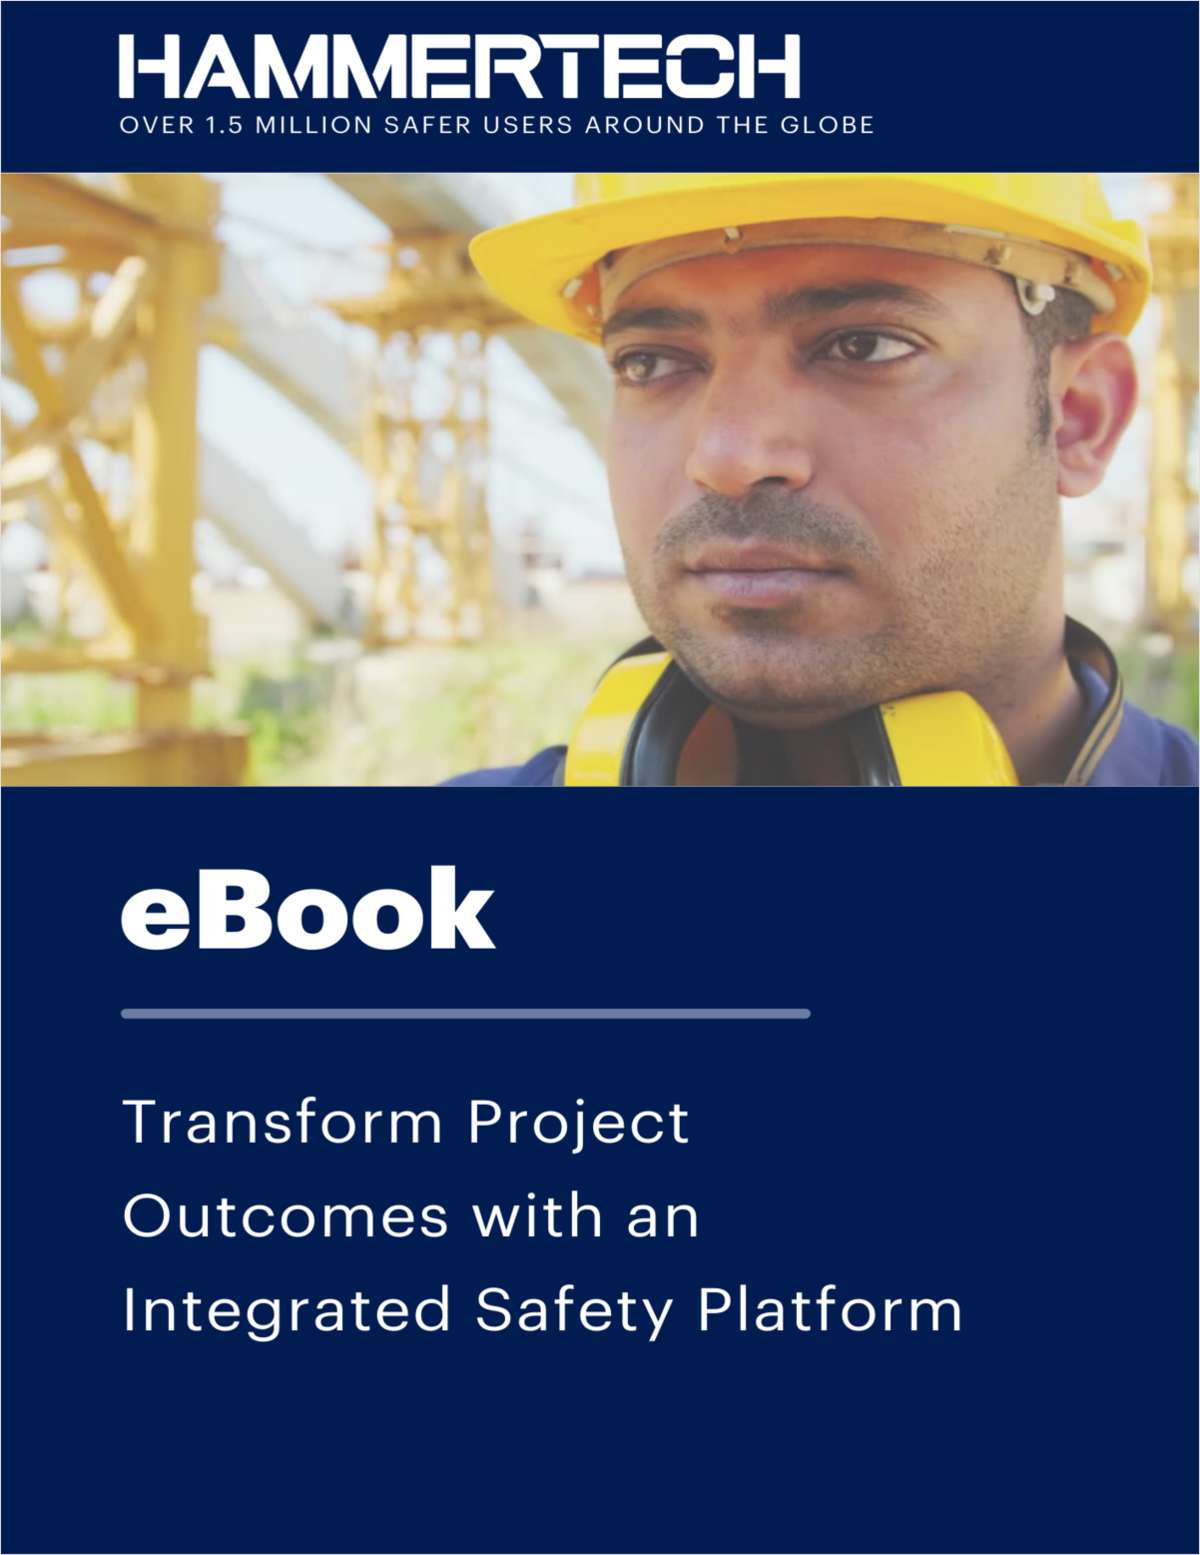 Transform Project Outcomes with an Integrated Safety Platform